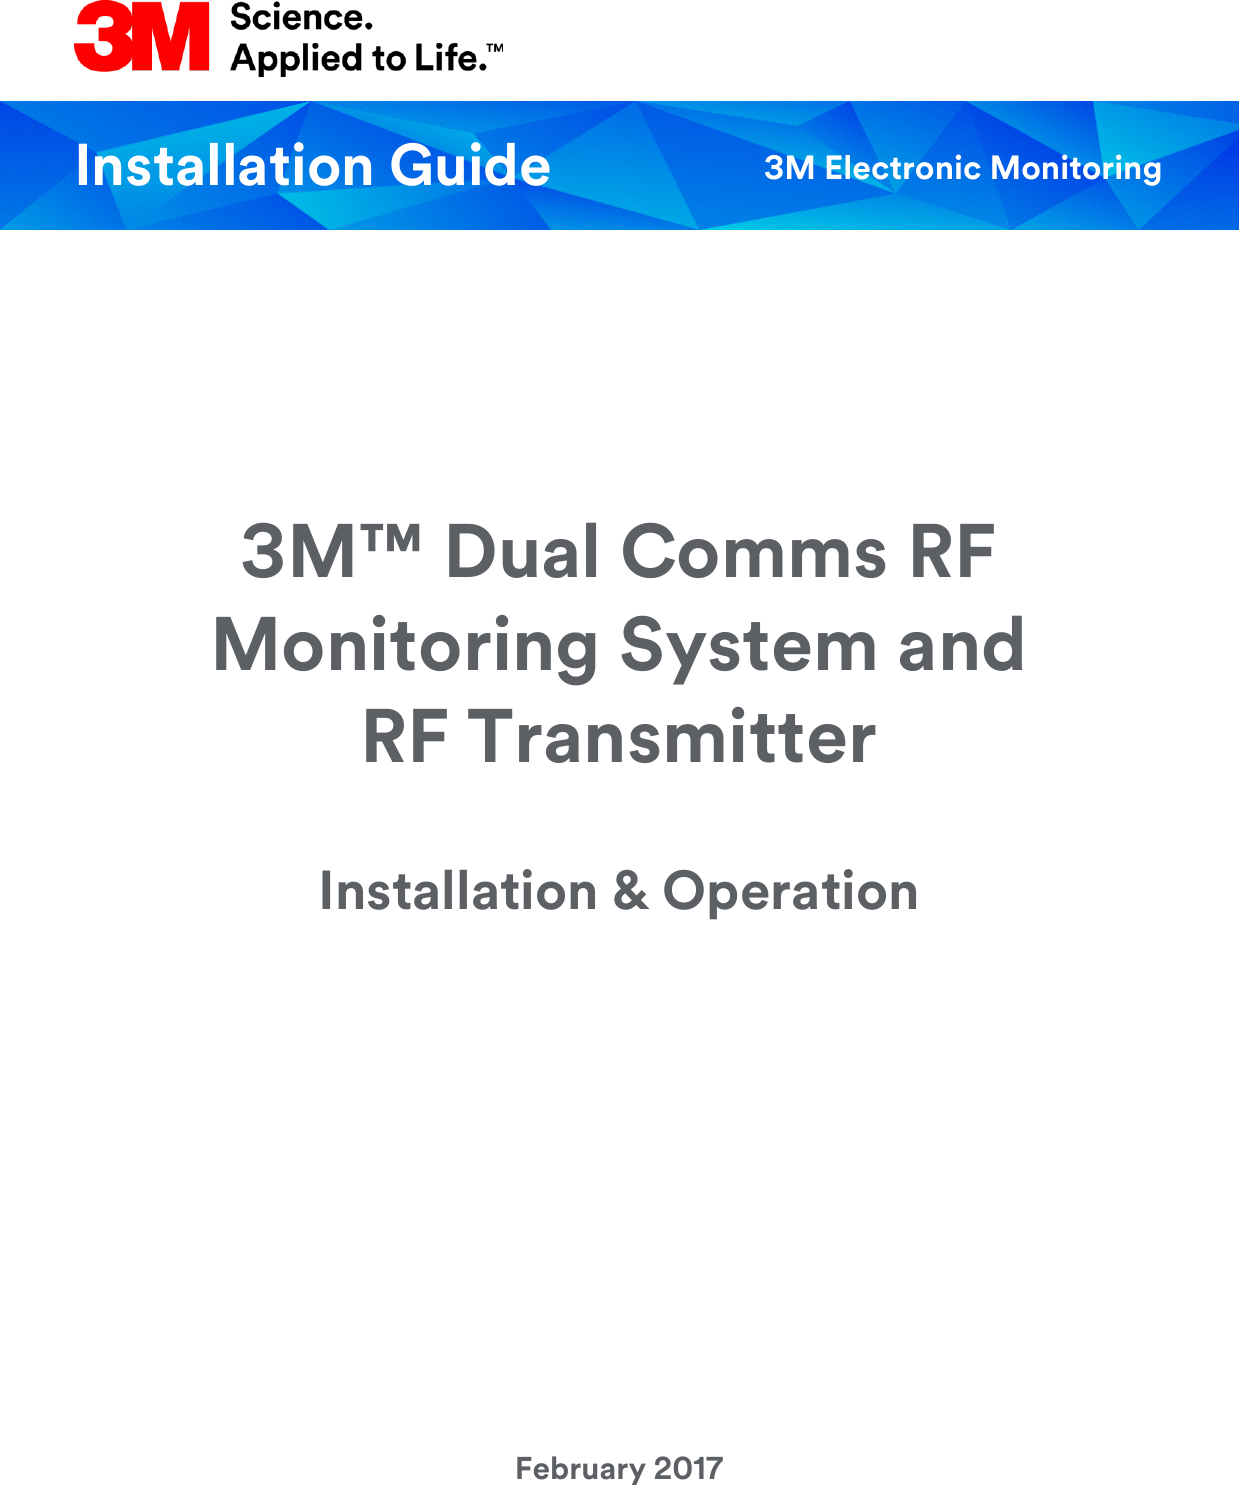   3M™ Dual Comms RF Monitoring System and  RF Transmitter Installation &amp; Operation            February 2017   Installation Guide 3M Electronic Monitoring 